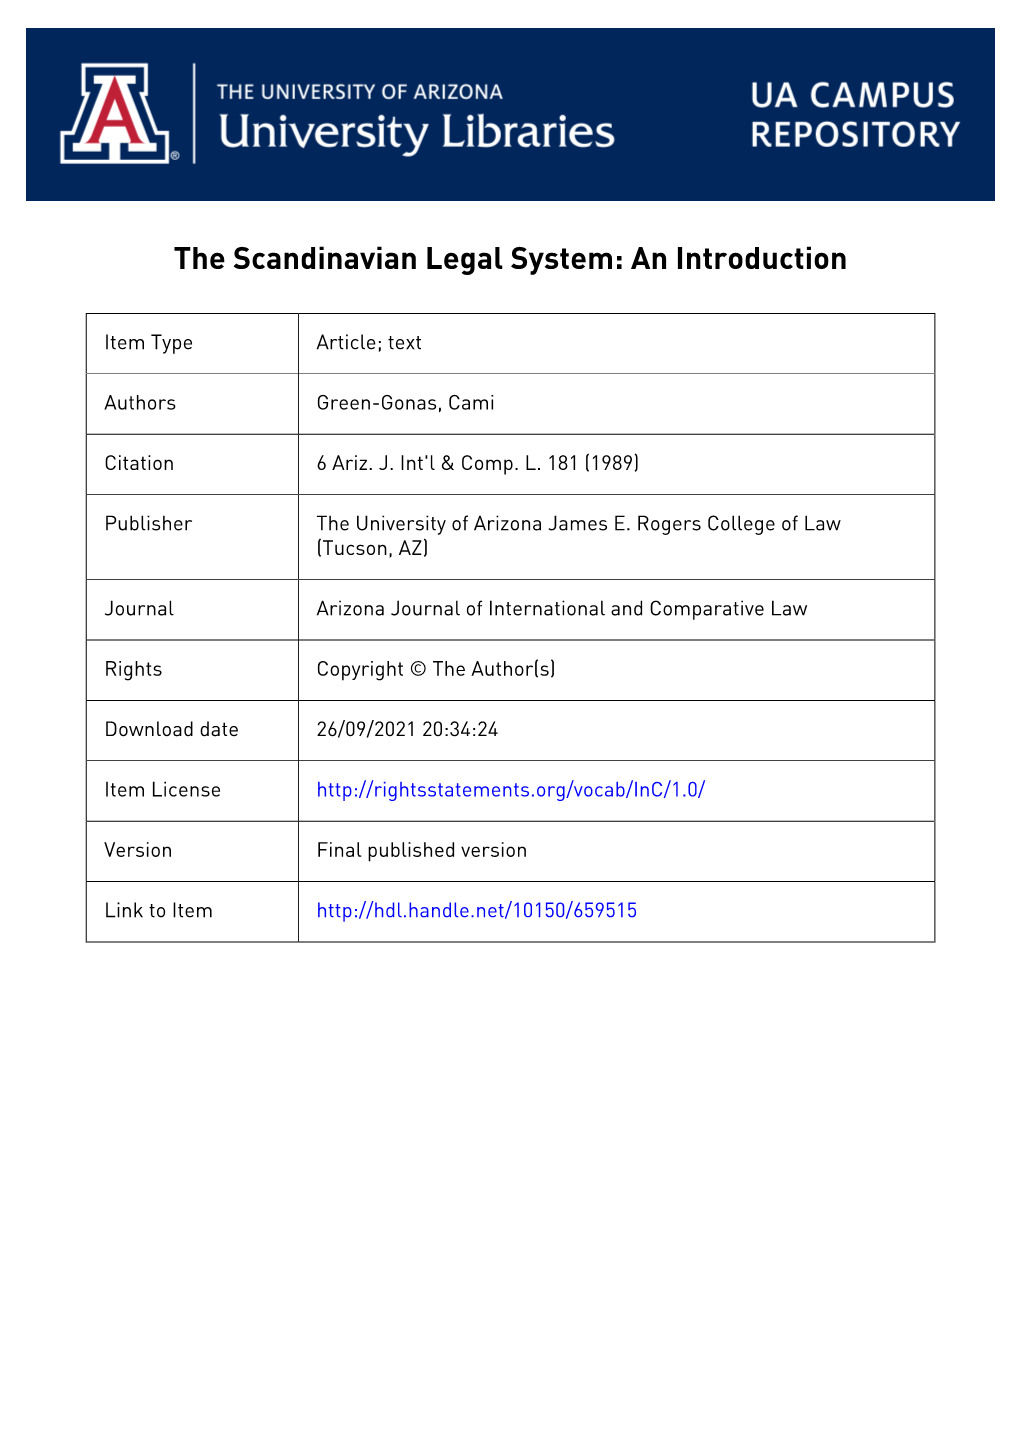 The Scandanavian Legal System: an Introduction